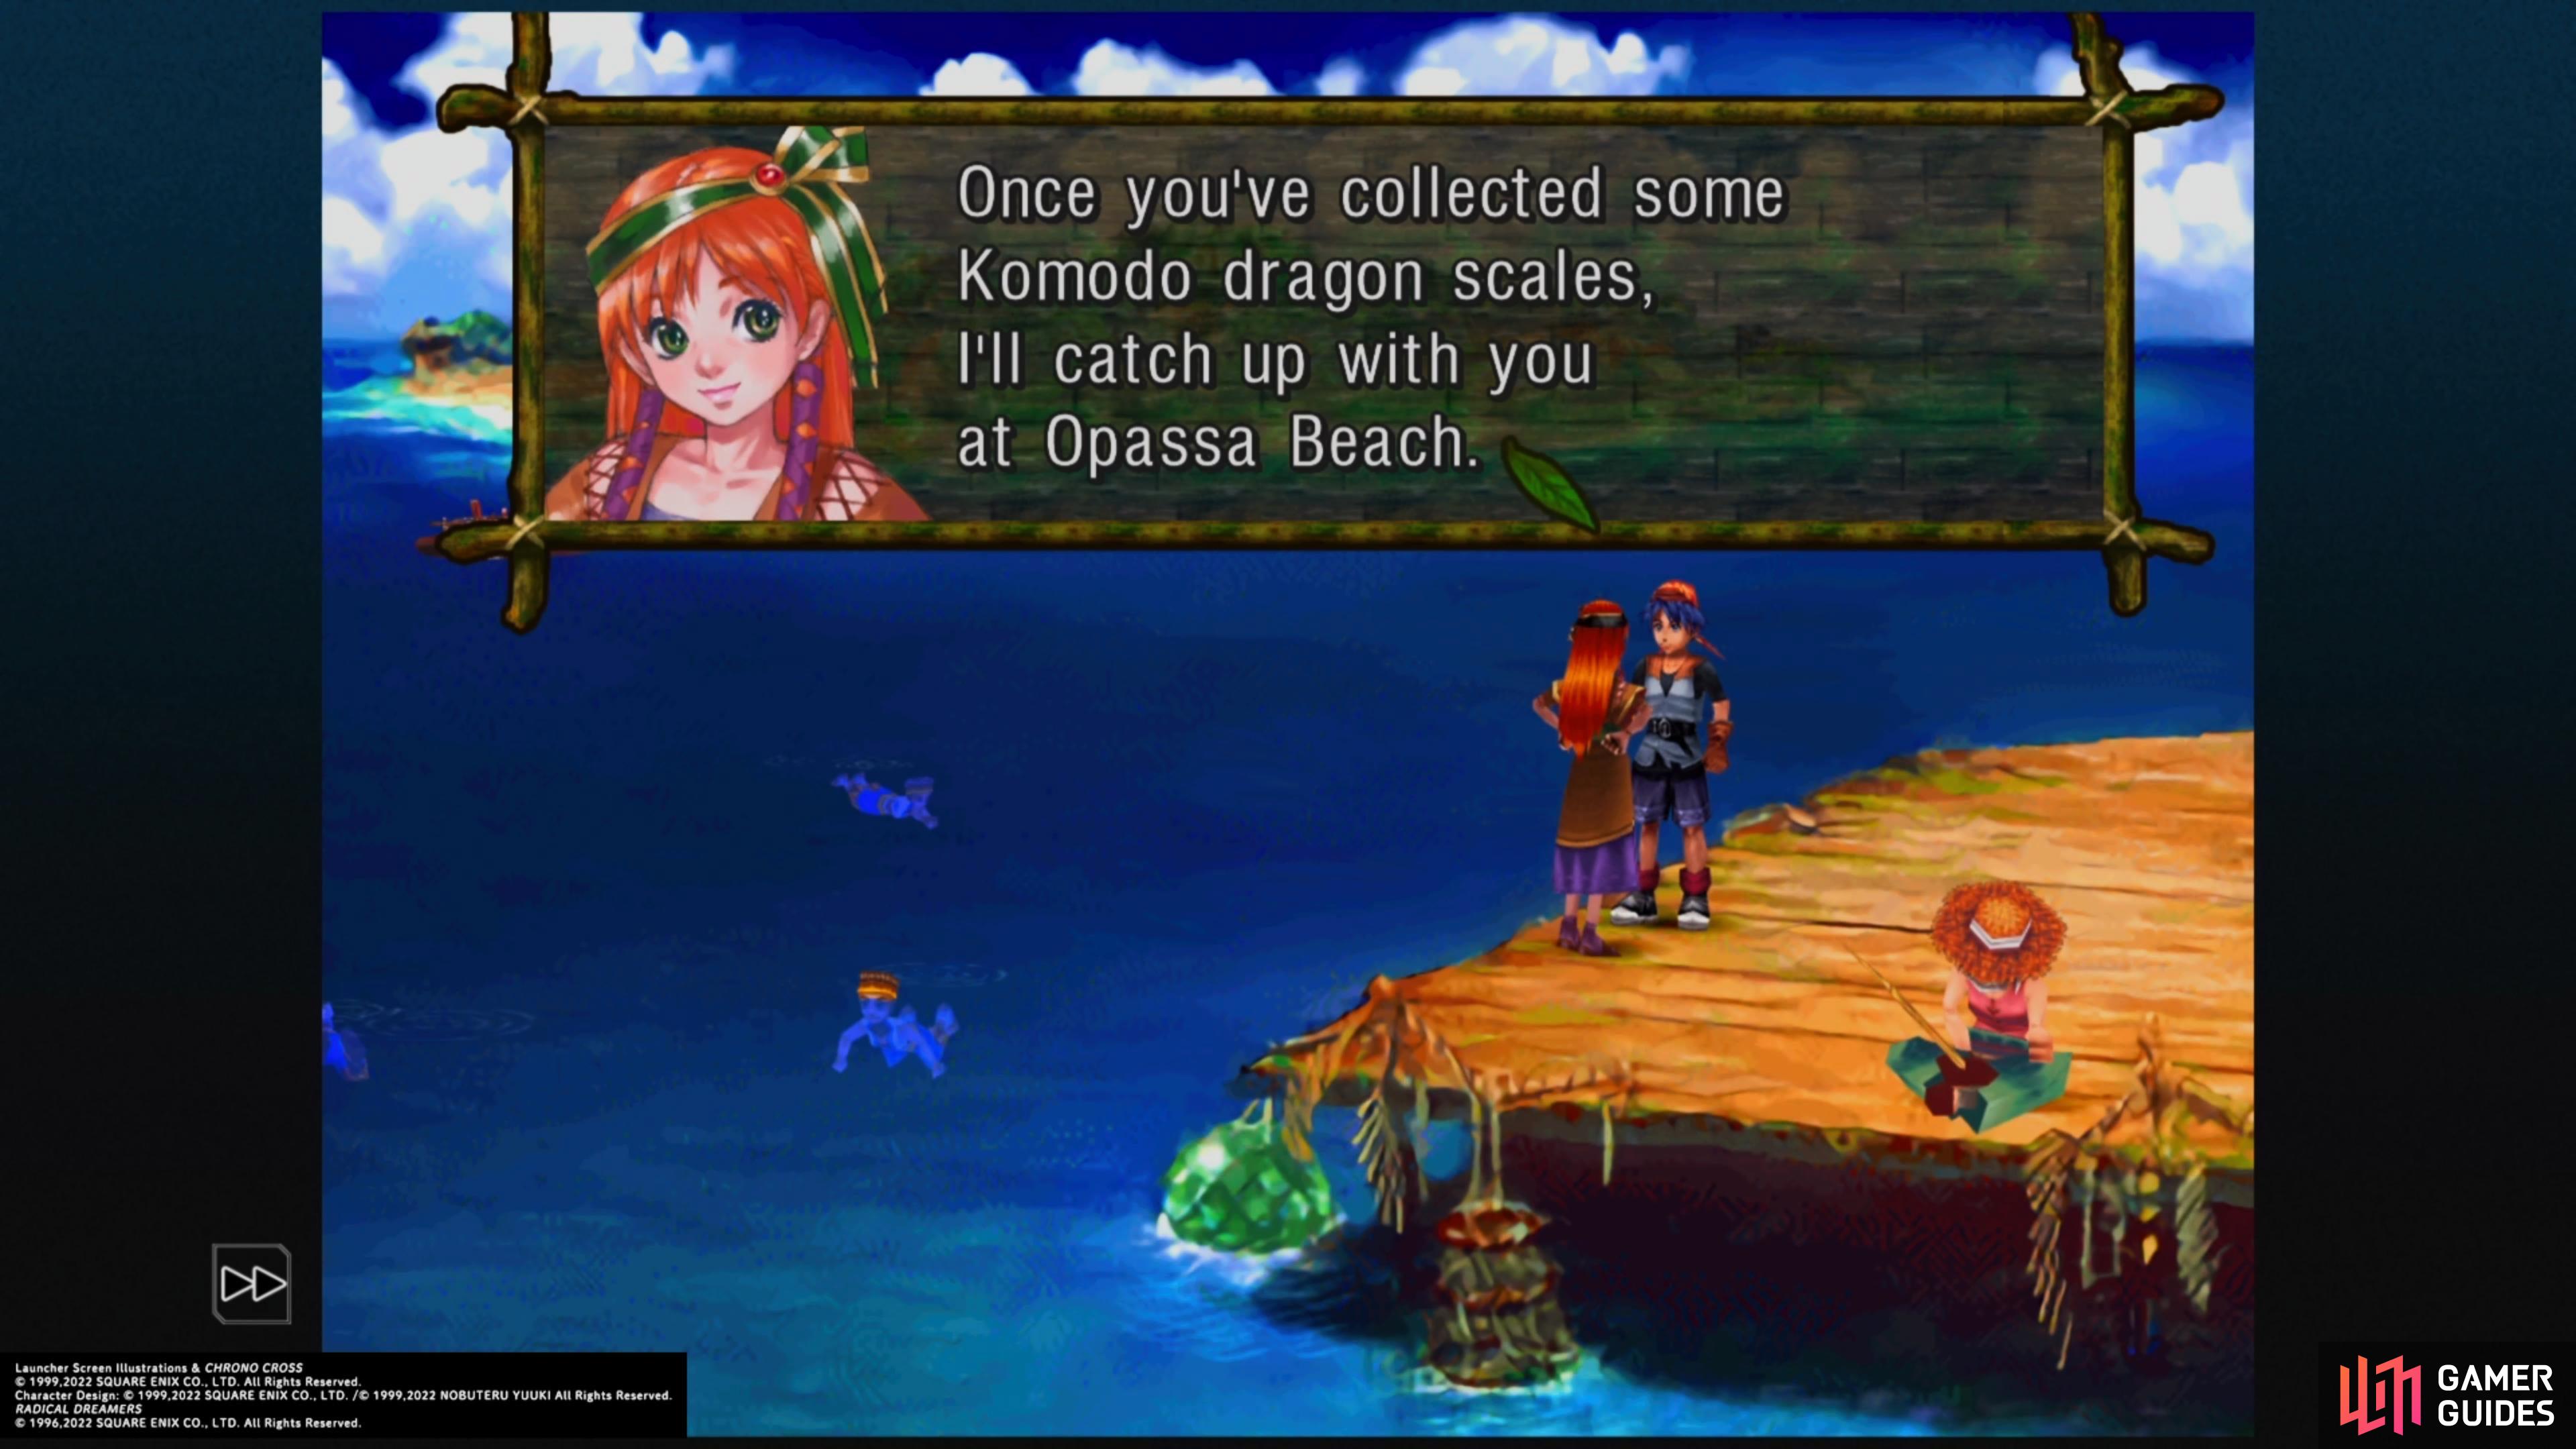 How to Unlock Characters in Chrono Cross (with Pictures) - wikiHow